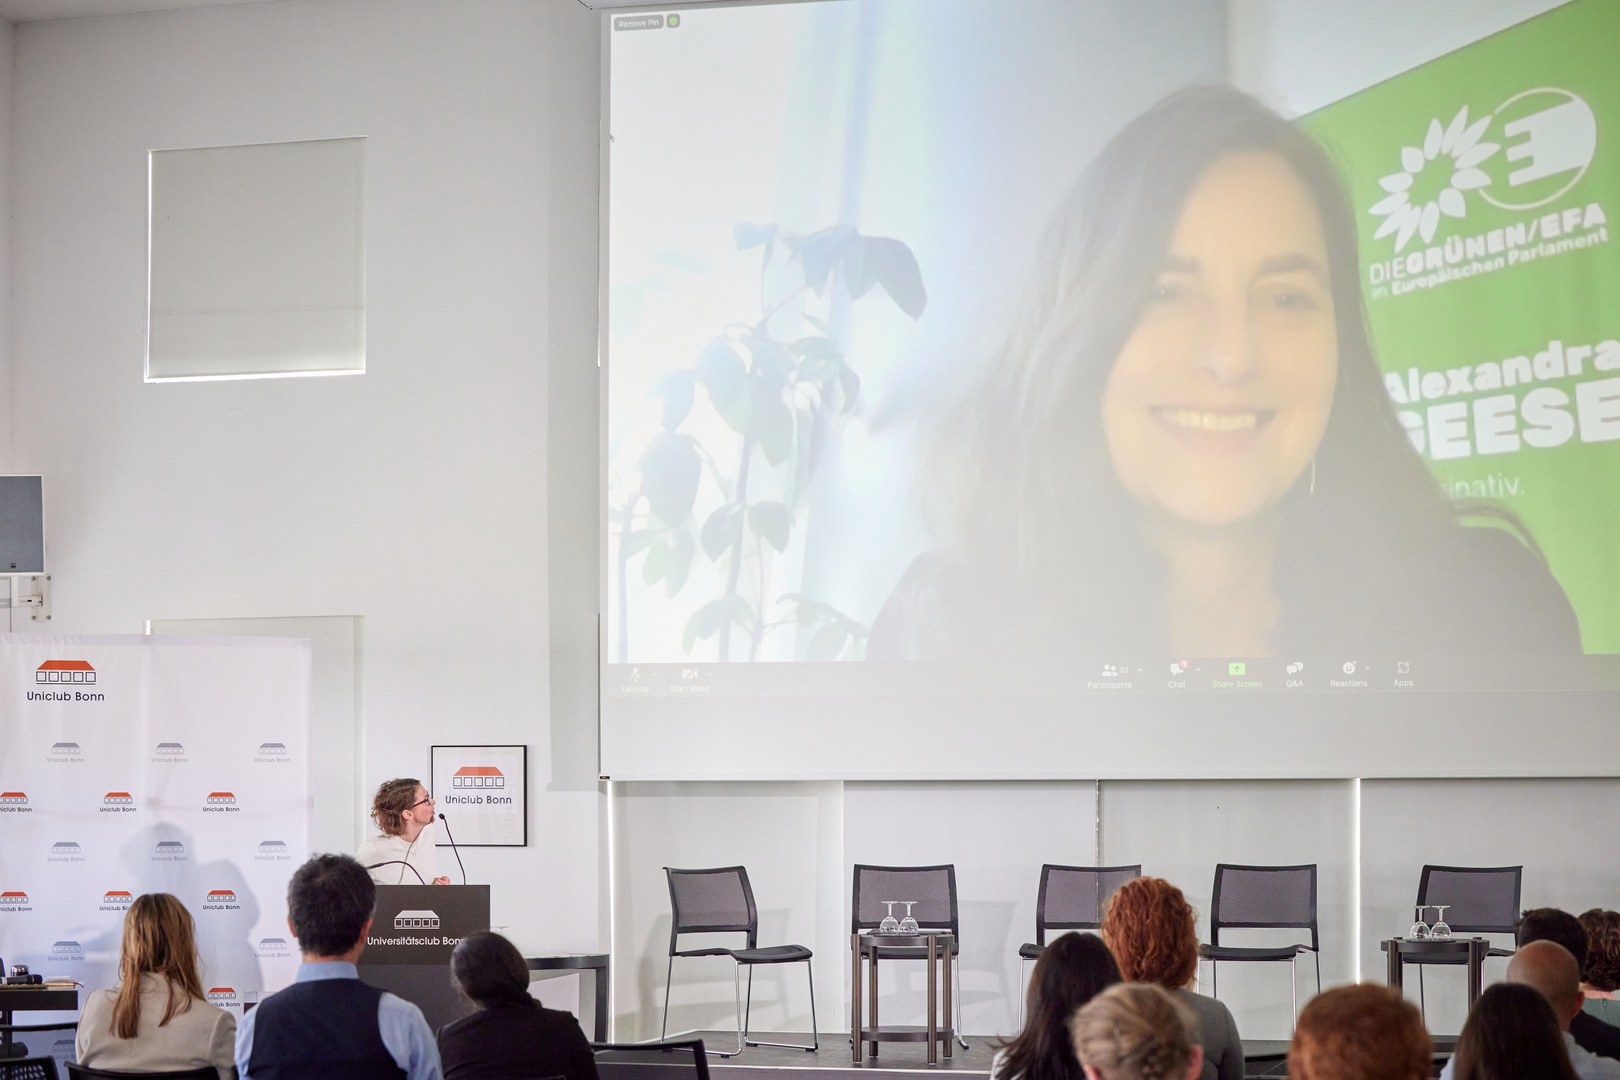 Political perspective: Alexandra Geese, Member of the European Parliament from Bonn, was connected via video stream.